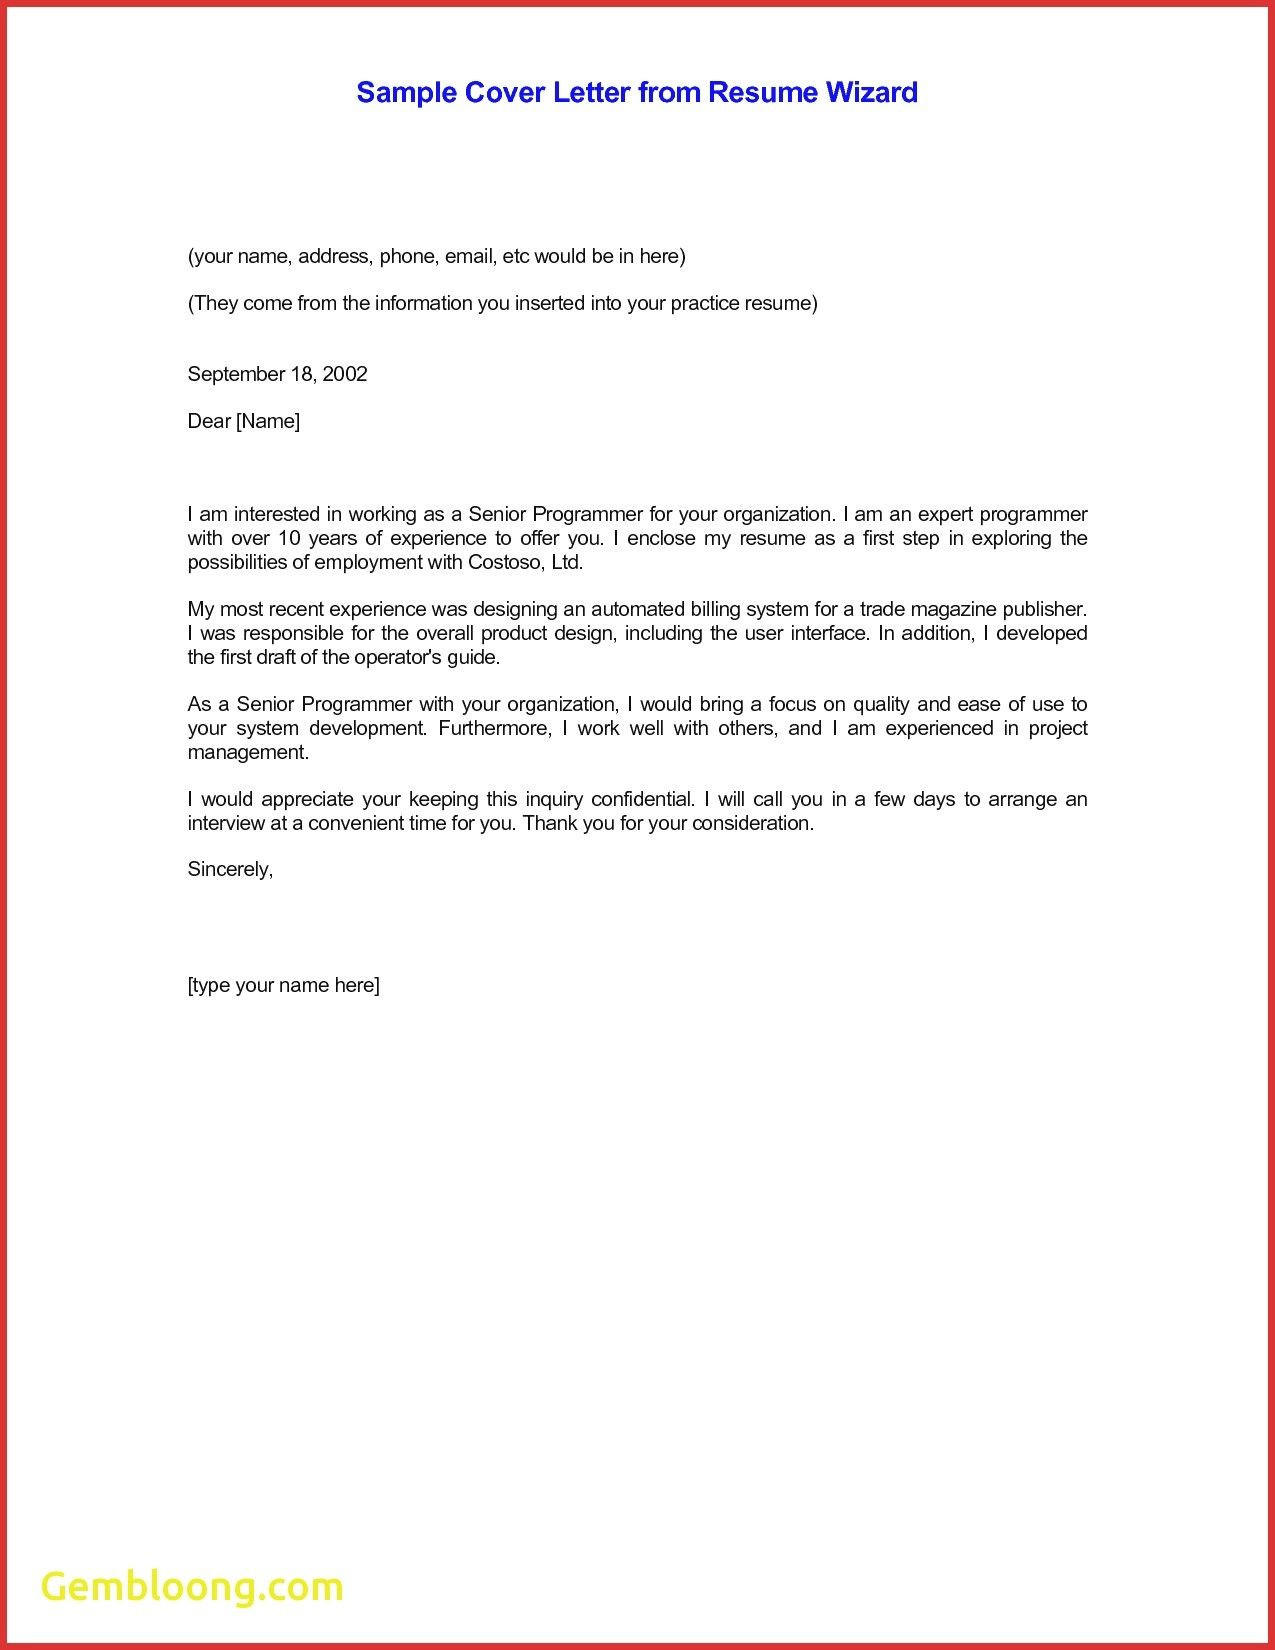 Cover Letter for Emailing Resume Samples Email Cv Cover Letter Template – Resume format Cover Letter for …